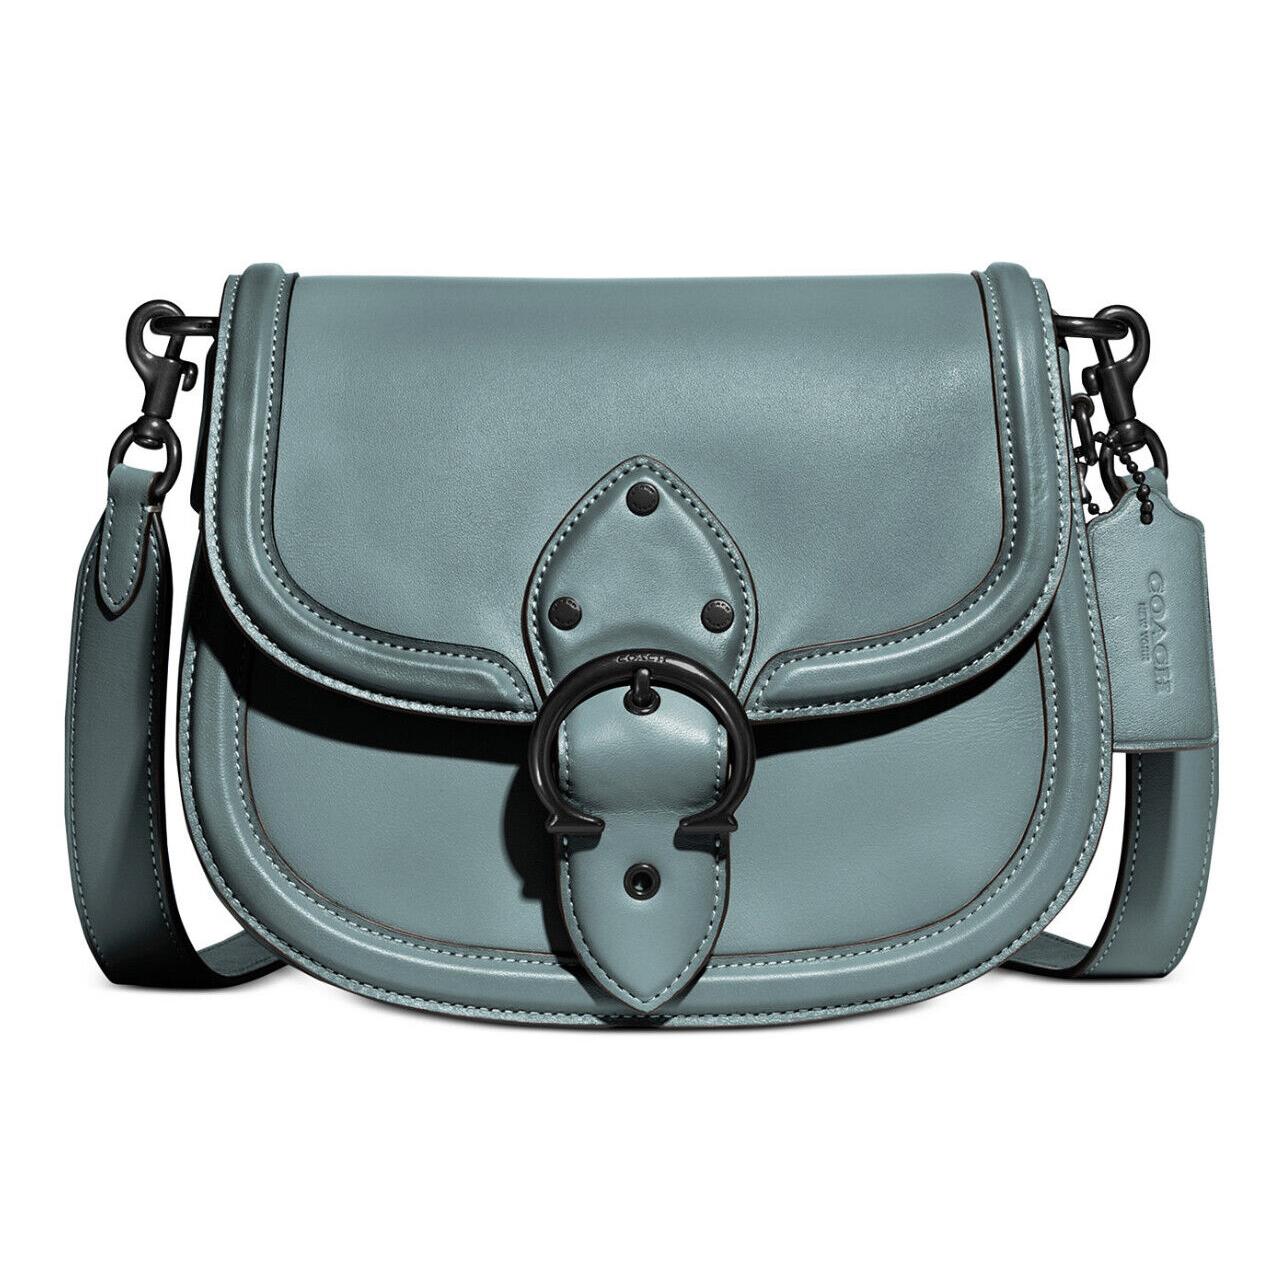 Coach Glovetanned Leather Beat Saddle Bag in Sage